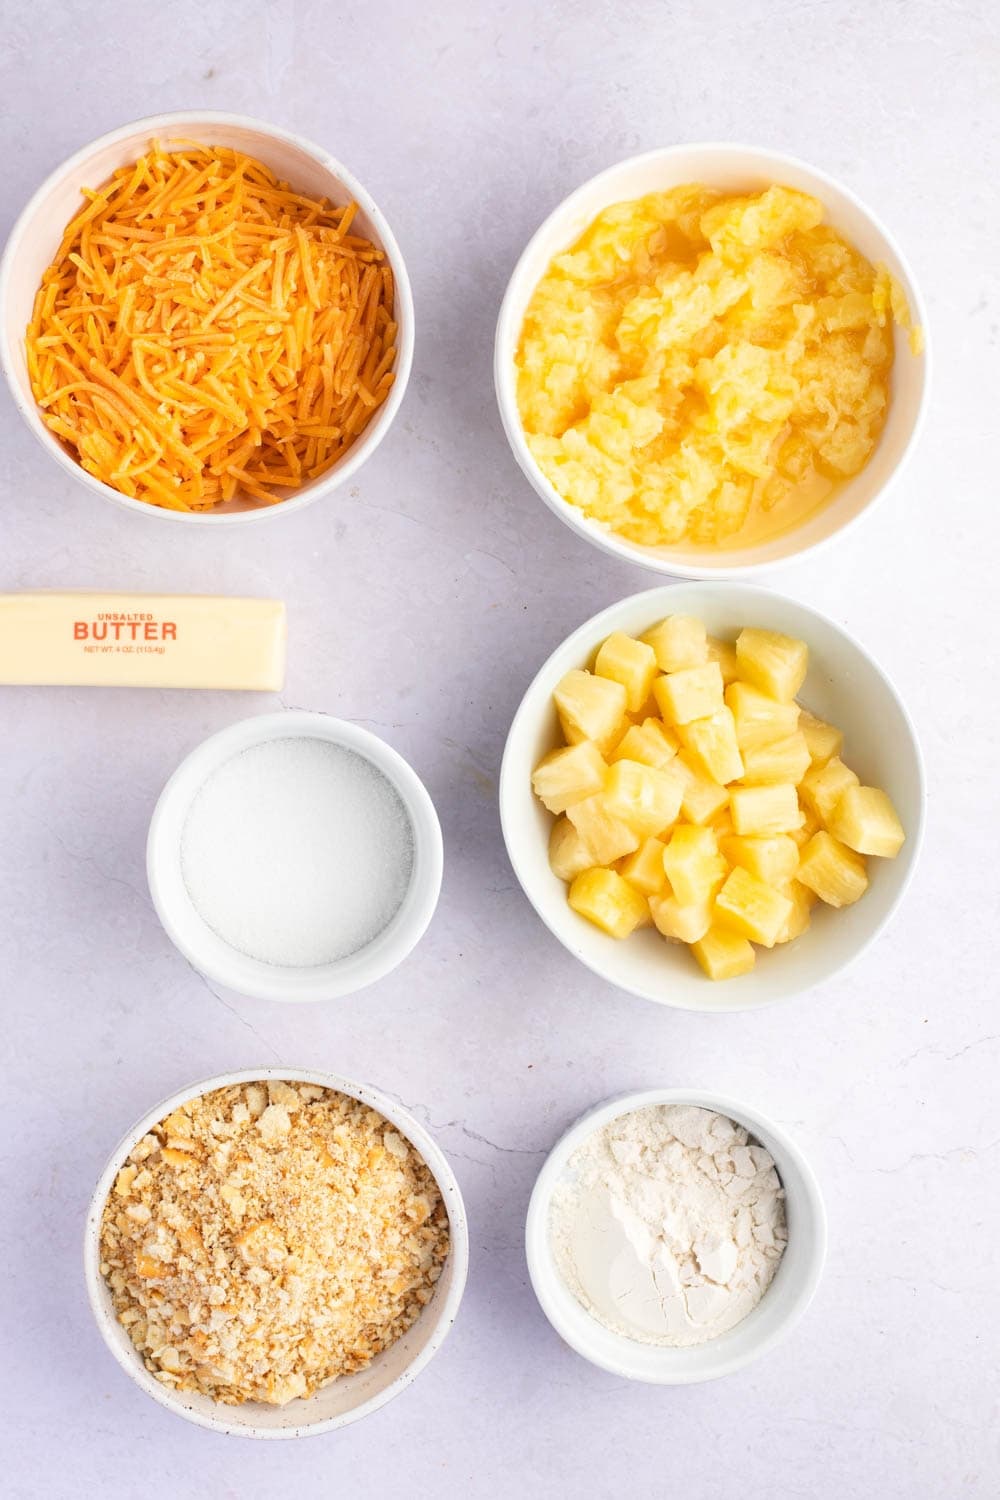 Pineapple Casserole Ingredients - Pineapple Chunks, Crushed Pineapple, Cheese, Sugar, Flour, Buttery Round Crackers and Butter